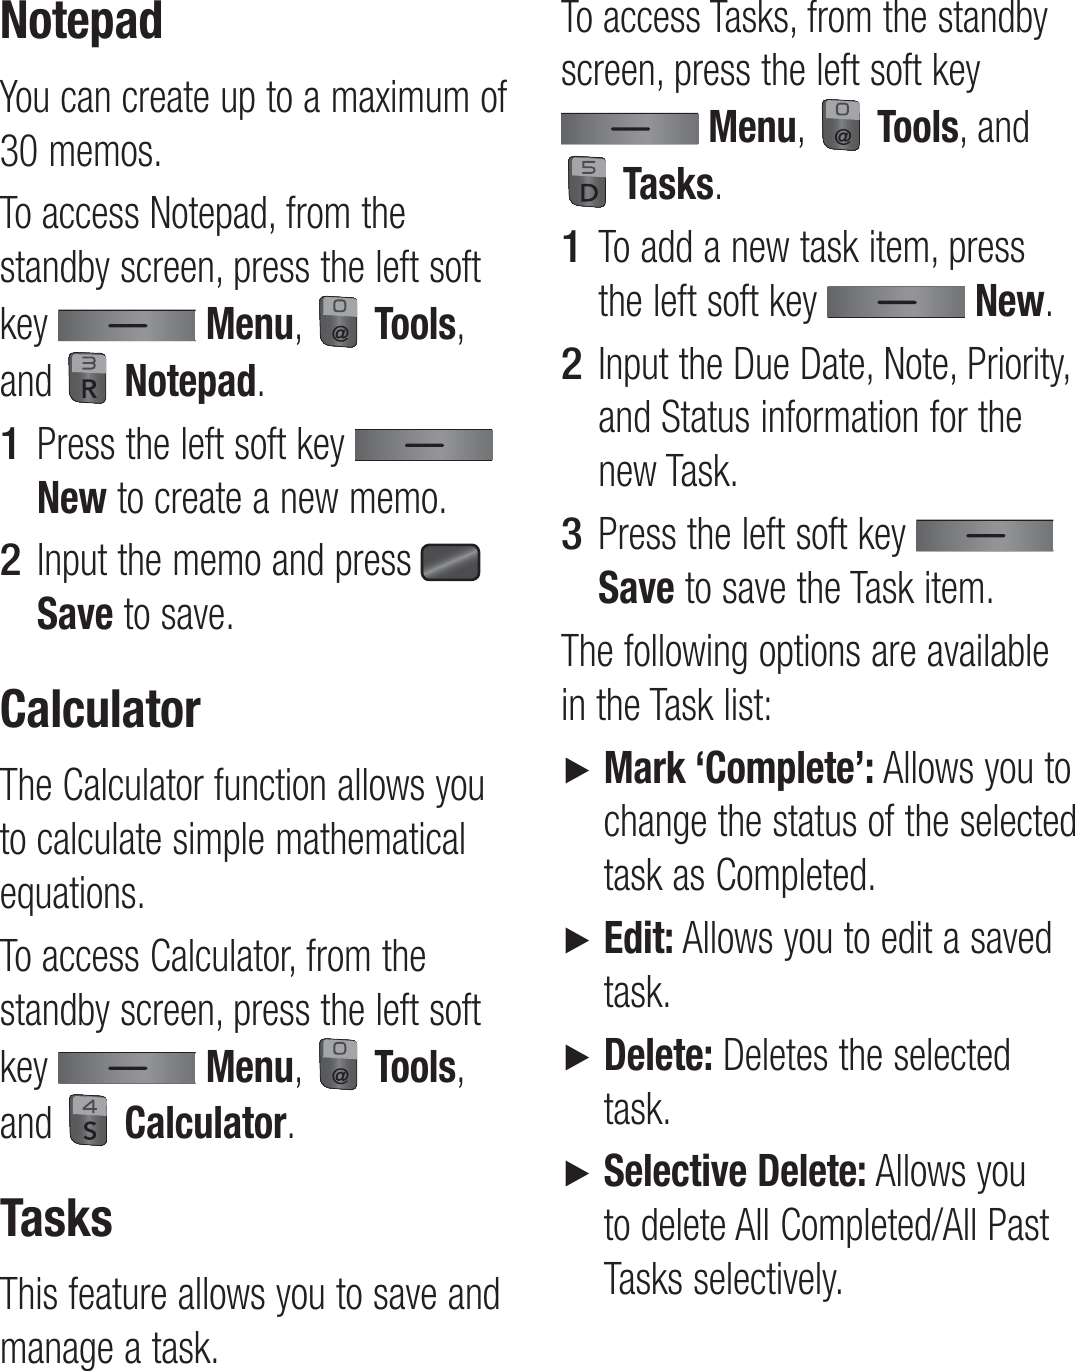 NotepadYou can create up to a maximum of 30 memos.To access Notepad, from the standby screen, press the left soft key   Menu,   Tools, and   Notepad.Press the left soft key   New to create a new memo.Input the memo and press   Save to save.CalculatorThe Calculator function allows you to calculate simple mathematical equations.To access Calculator, from the standby screen, press the left soft key   Menu,   Tools, and   Calculator.TasksThis feature allows you to save and manage a task.1 2 To access Tasks, from the standby screen, press the left soft key  Menu,   Tools, and  Tasks.To add a new task item, press the left soft key   New.Input the Due Date, Note, Priority, and Status information for the new Task.Press the left soft key   Save to save the Task item.The following options are available in the Task list:►   Mark ‘Complete’: Allows you to change the status of the selected task as Completed.►   Edit: Allows you to edit a saved task.►   Delete: Deletes the selected task.►   Selective Delete: Allows you to delete All Completed/All Past Tasks selectively.1 2 3 